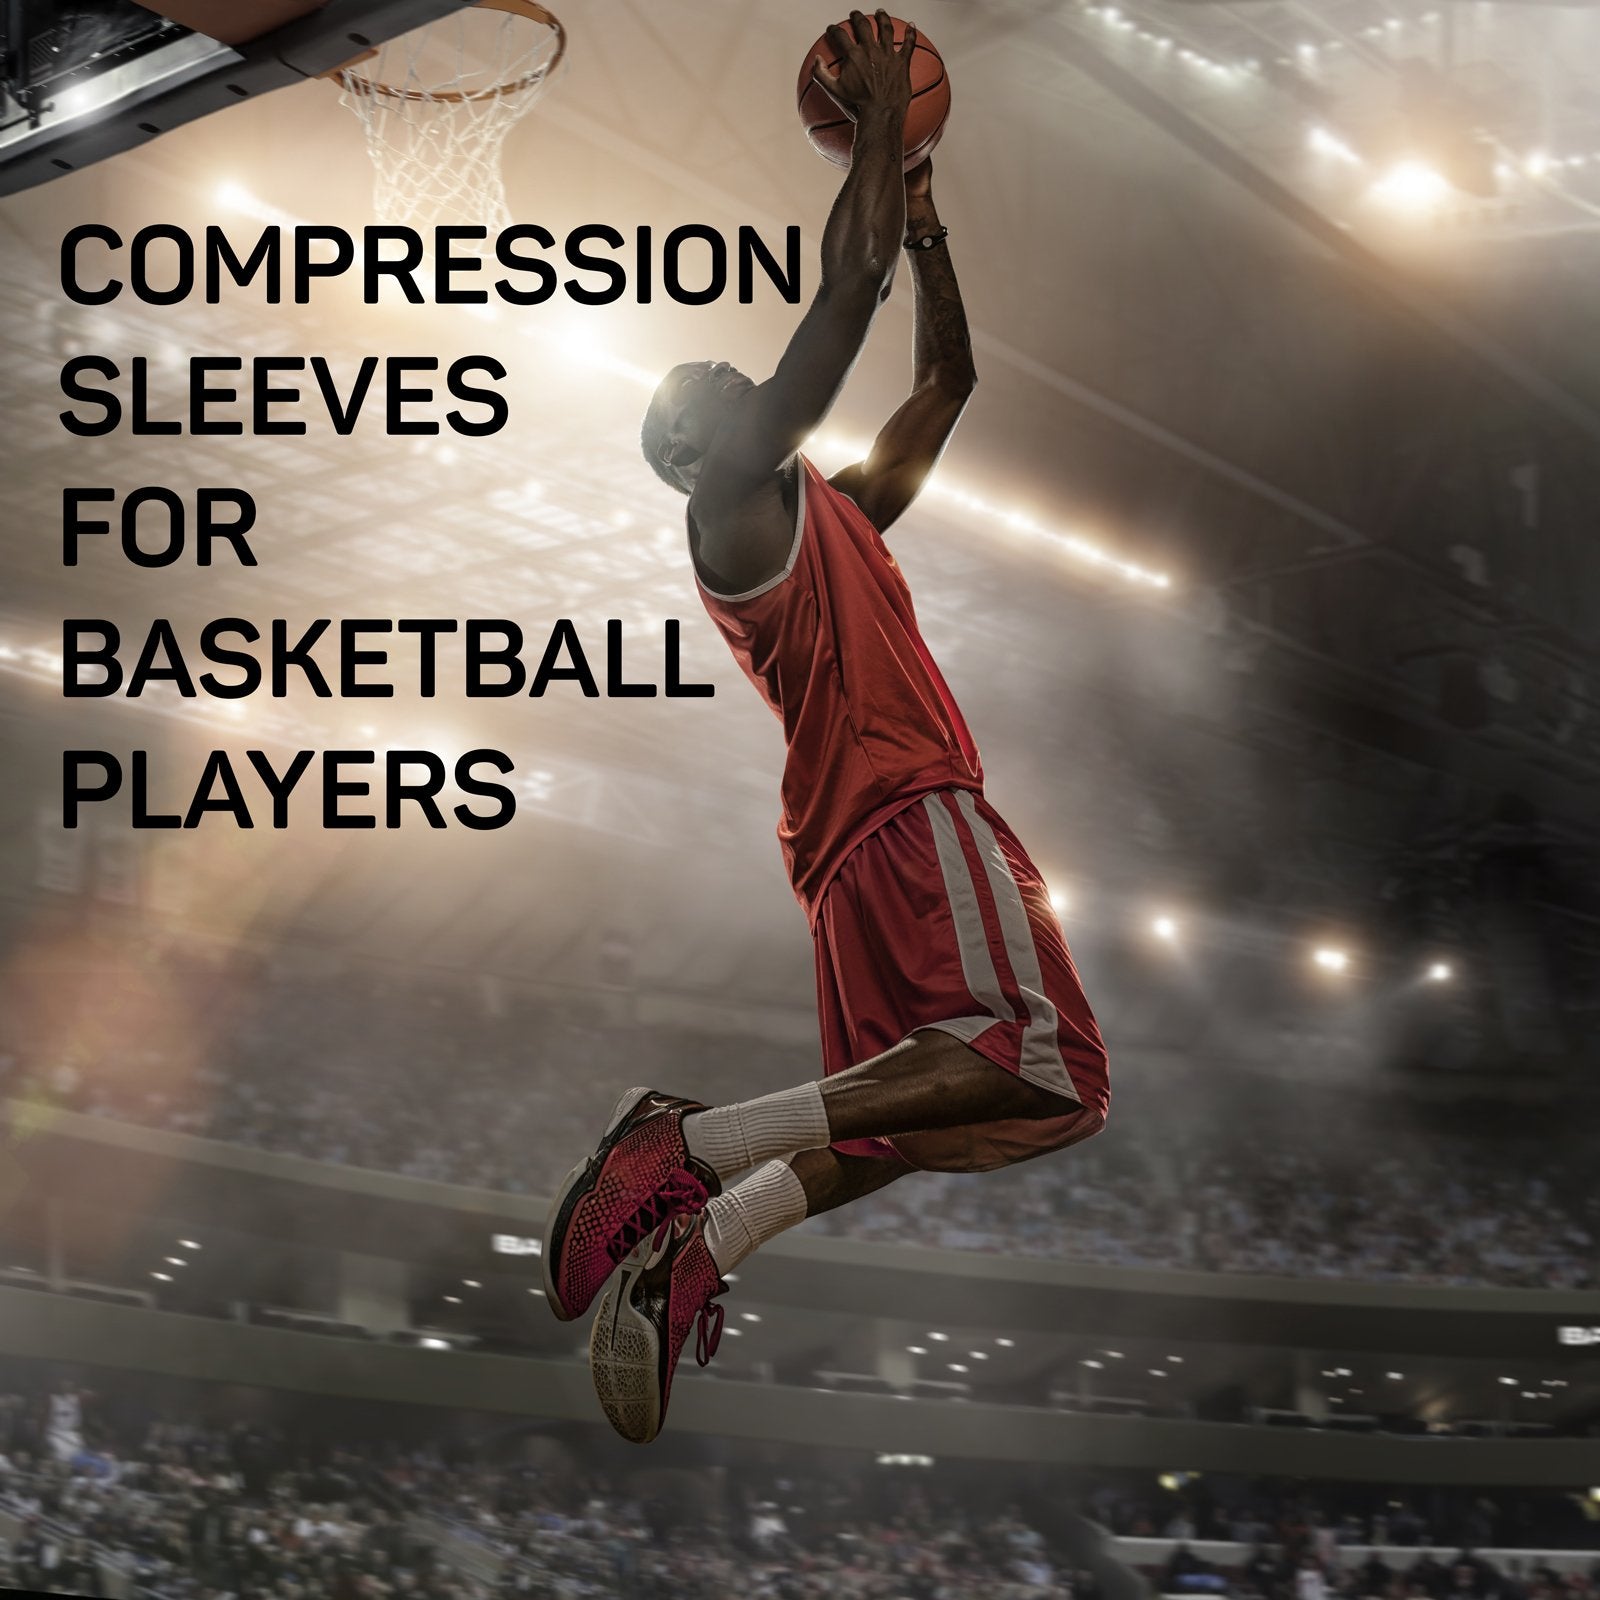 Why is a Compression Shin Sleeve Great for Basketball? – Orthosleeve